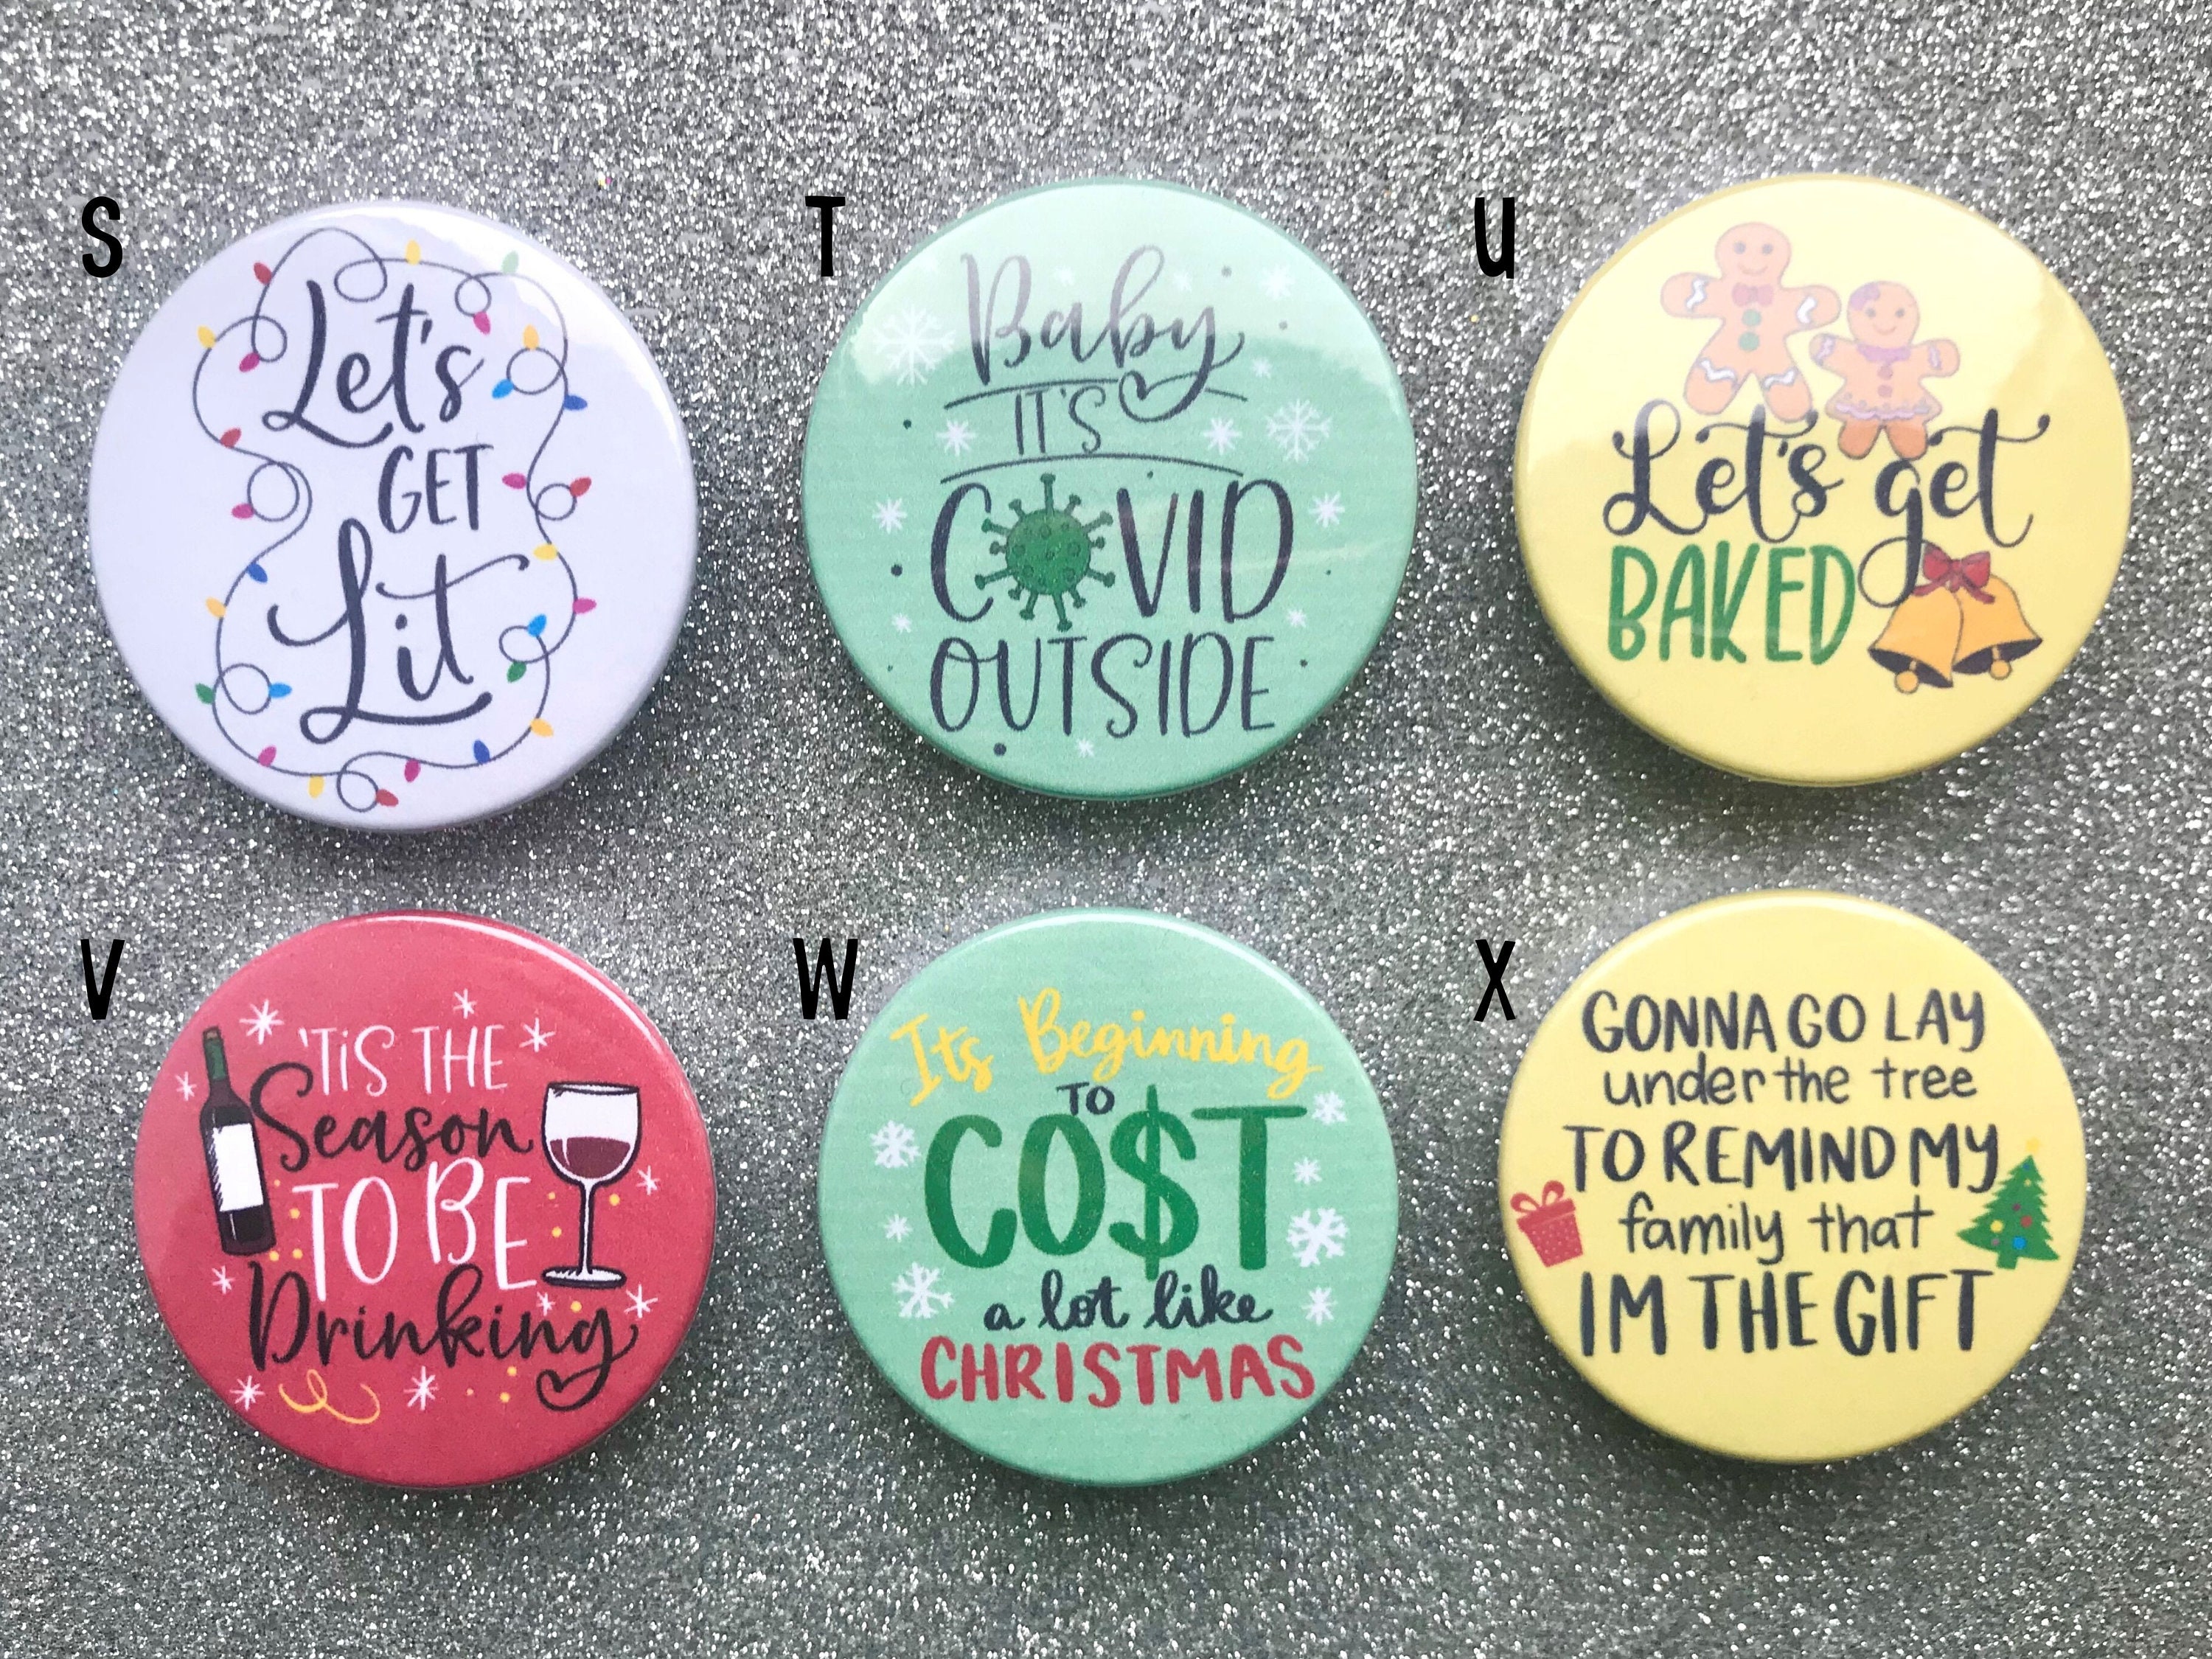 Random Christmas Buttons Pins - Small Christmas Party Gifts for Coworkers,  Favors, Decor, Decorations, Stockings - Set of 30 Mini 